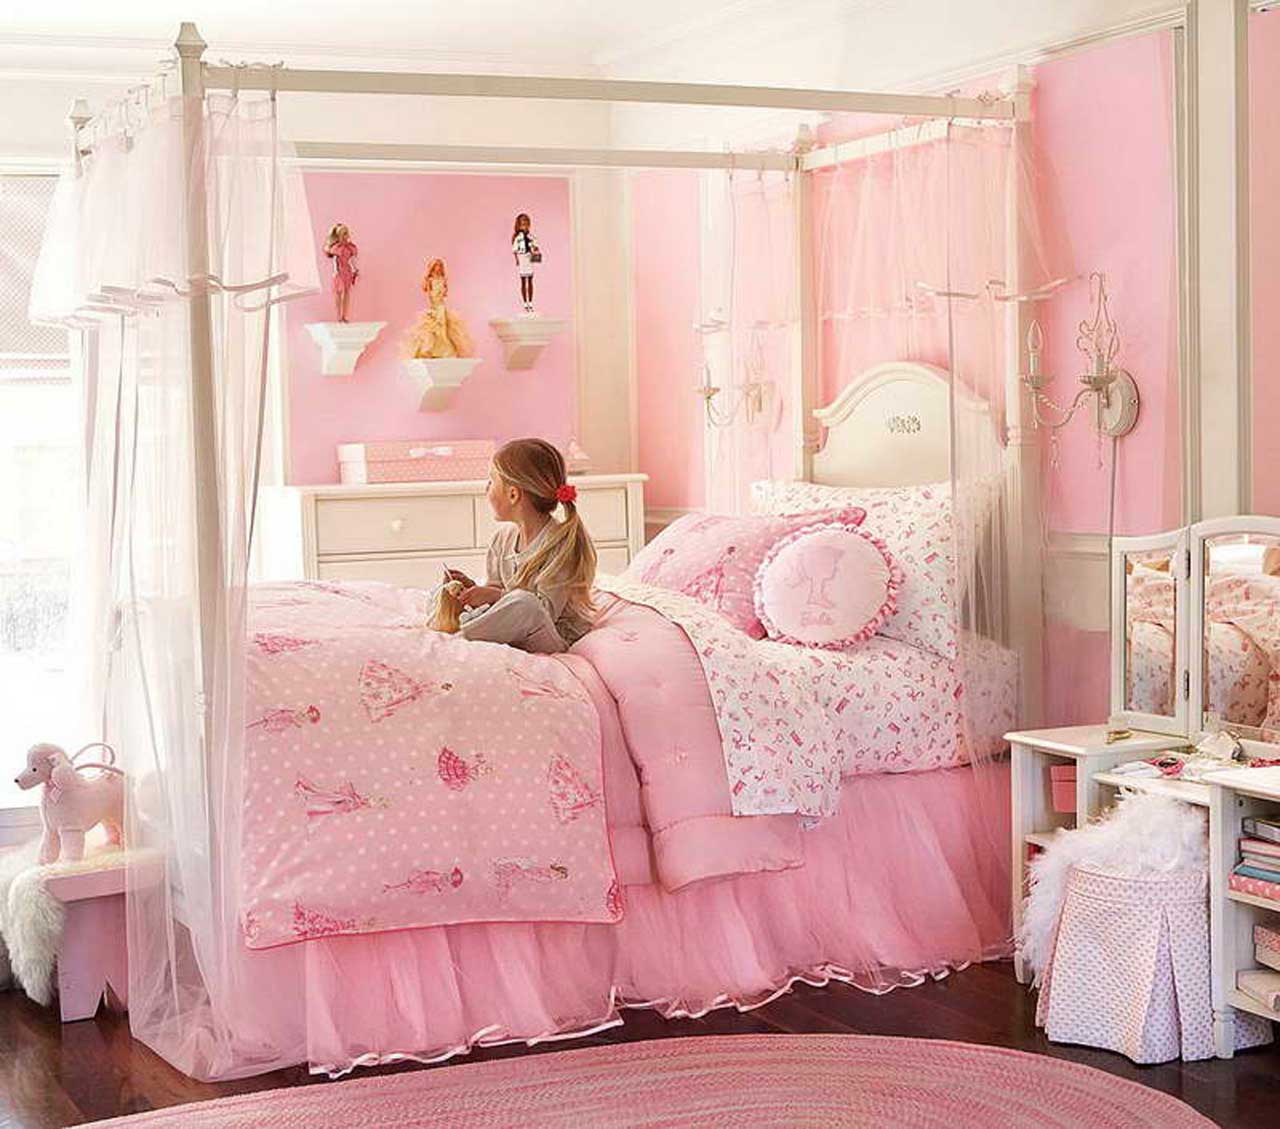 Fantastic Kids Room Decorating Barbie Wall Design Ideas With Cute Barbie Dolls In The Pink Shoes Design Also Thick Carpet Like Grass Kids Room Design Decor Small Fur Ideas